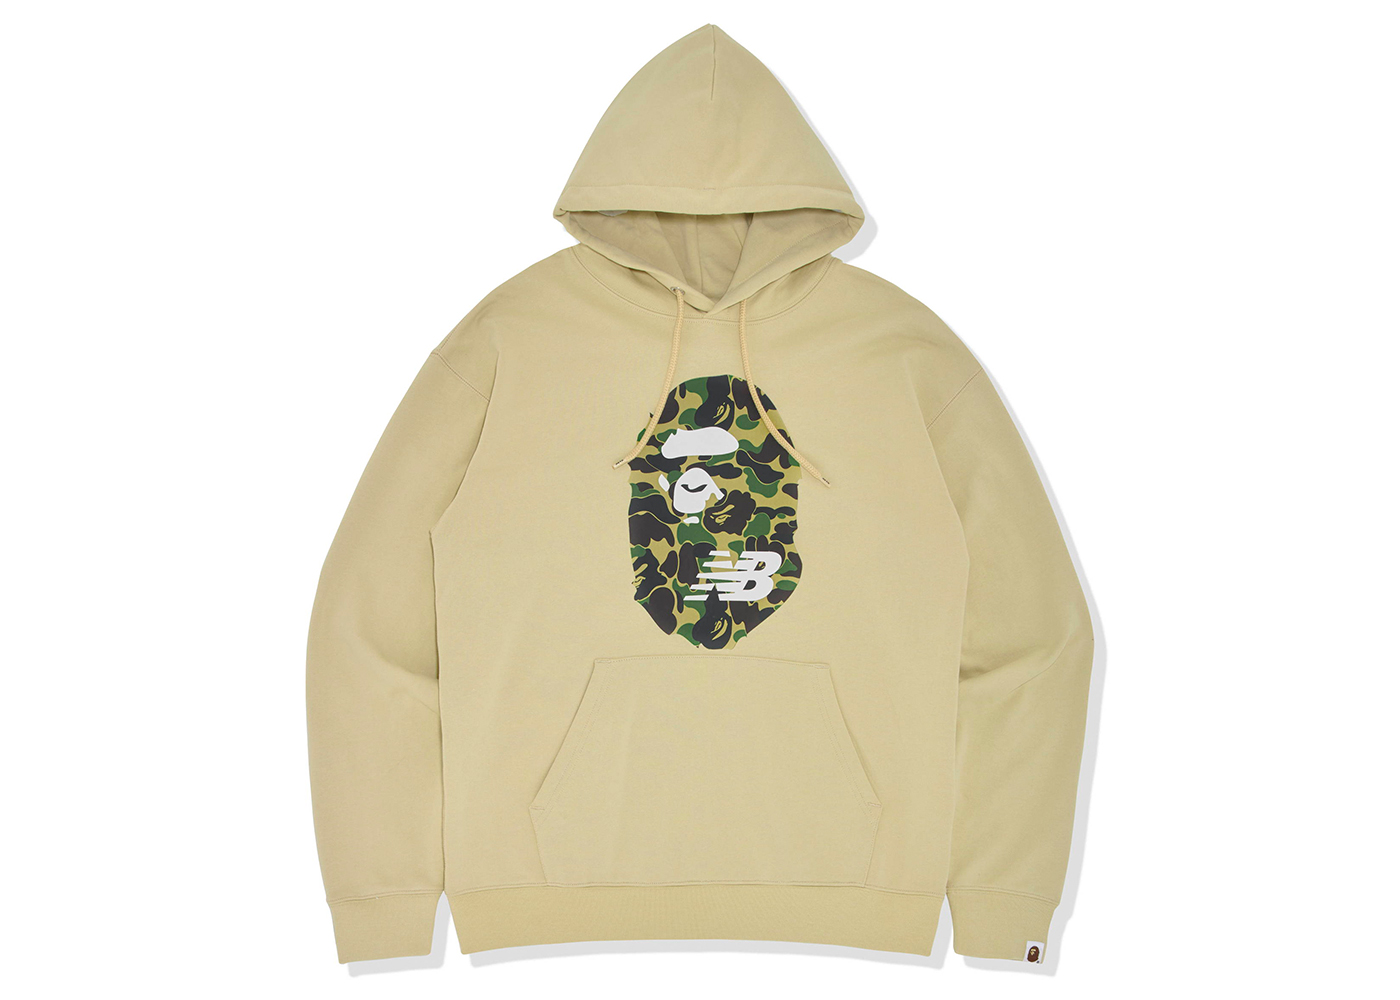 BAPE x New Balance Ape Head Relaxed Fit Pullover Hoodie Beige 